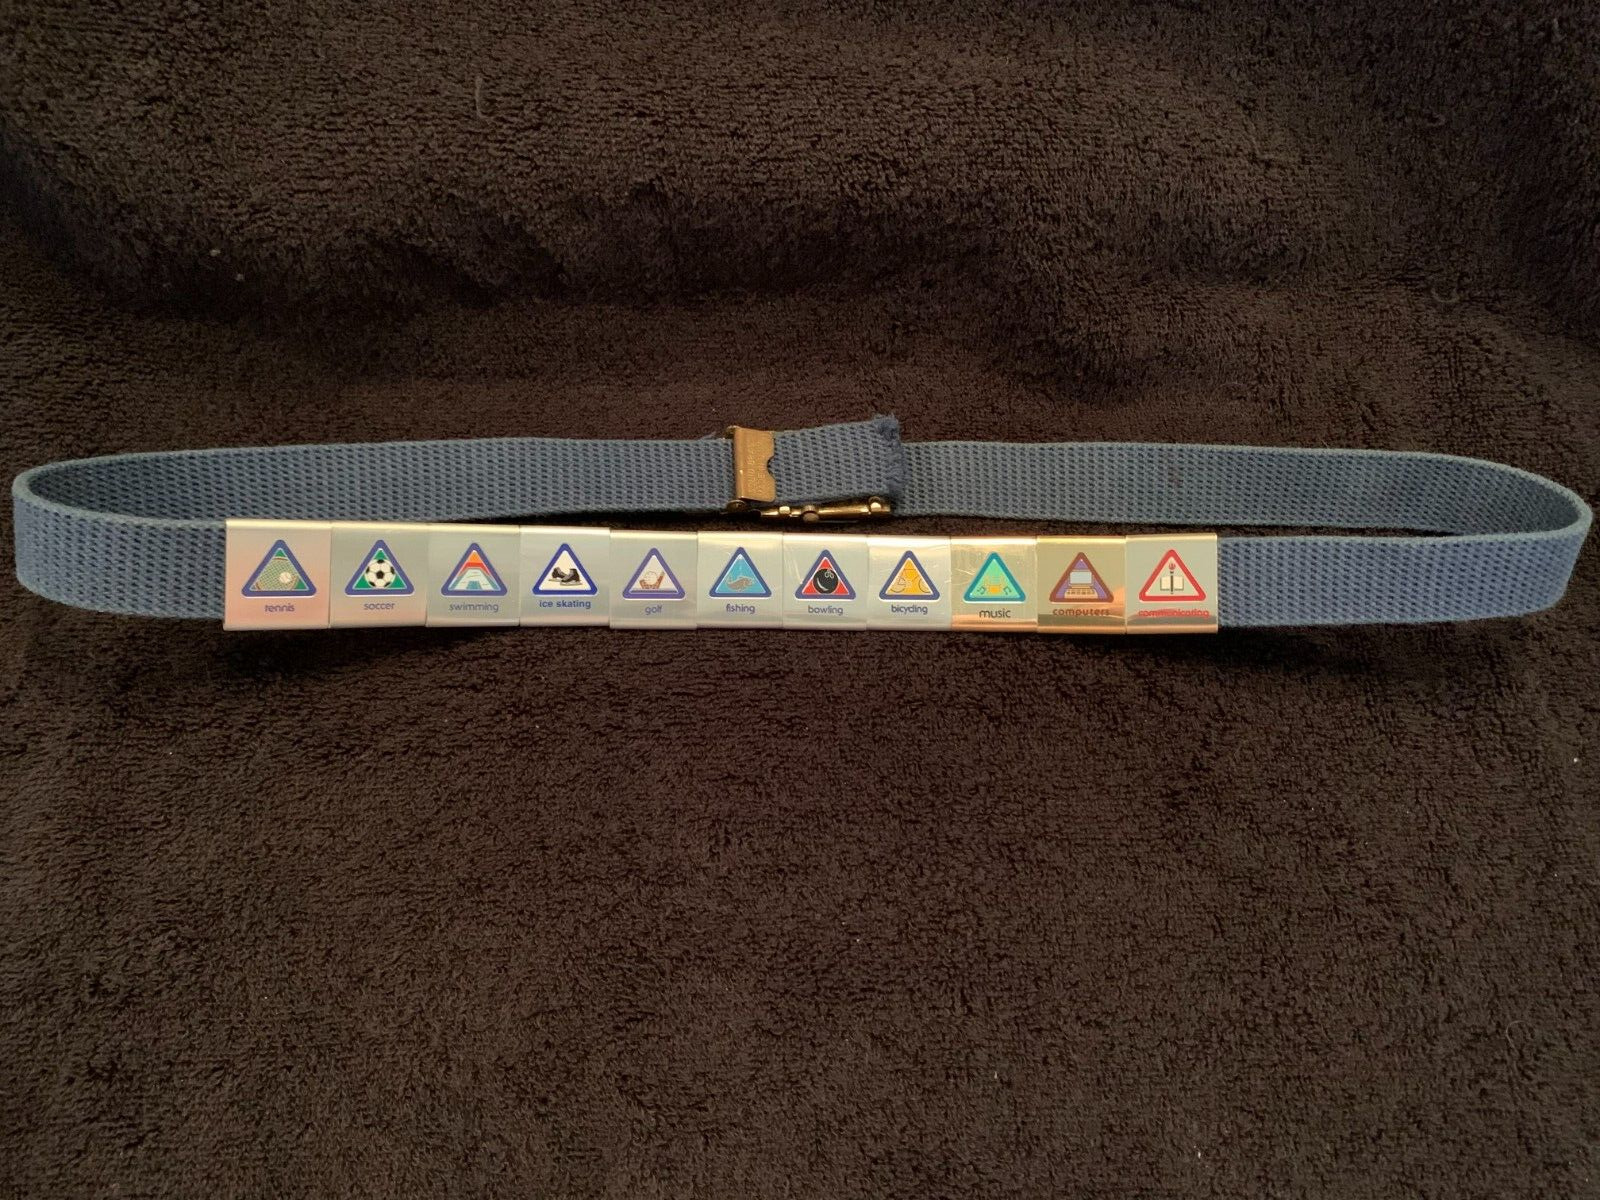 CUB SCOUT BELT WITH 11 LOOPS MERIT ACHIEVEMENT AWARD RECOGNITION